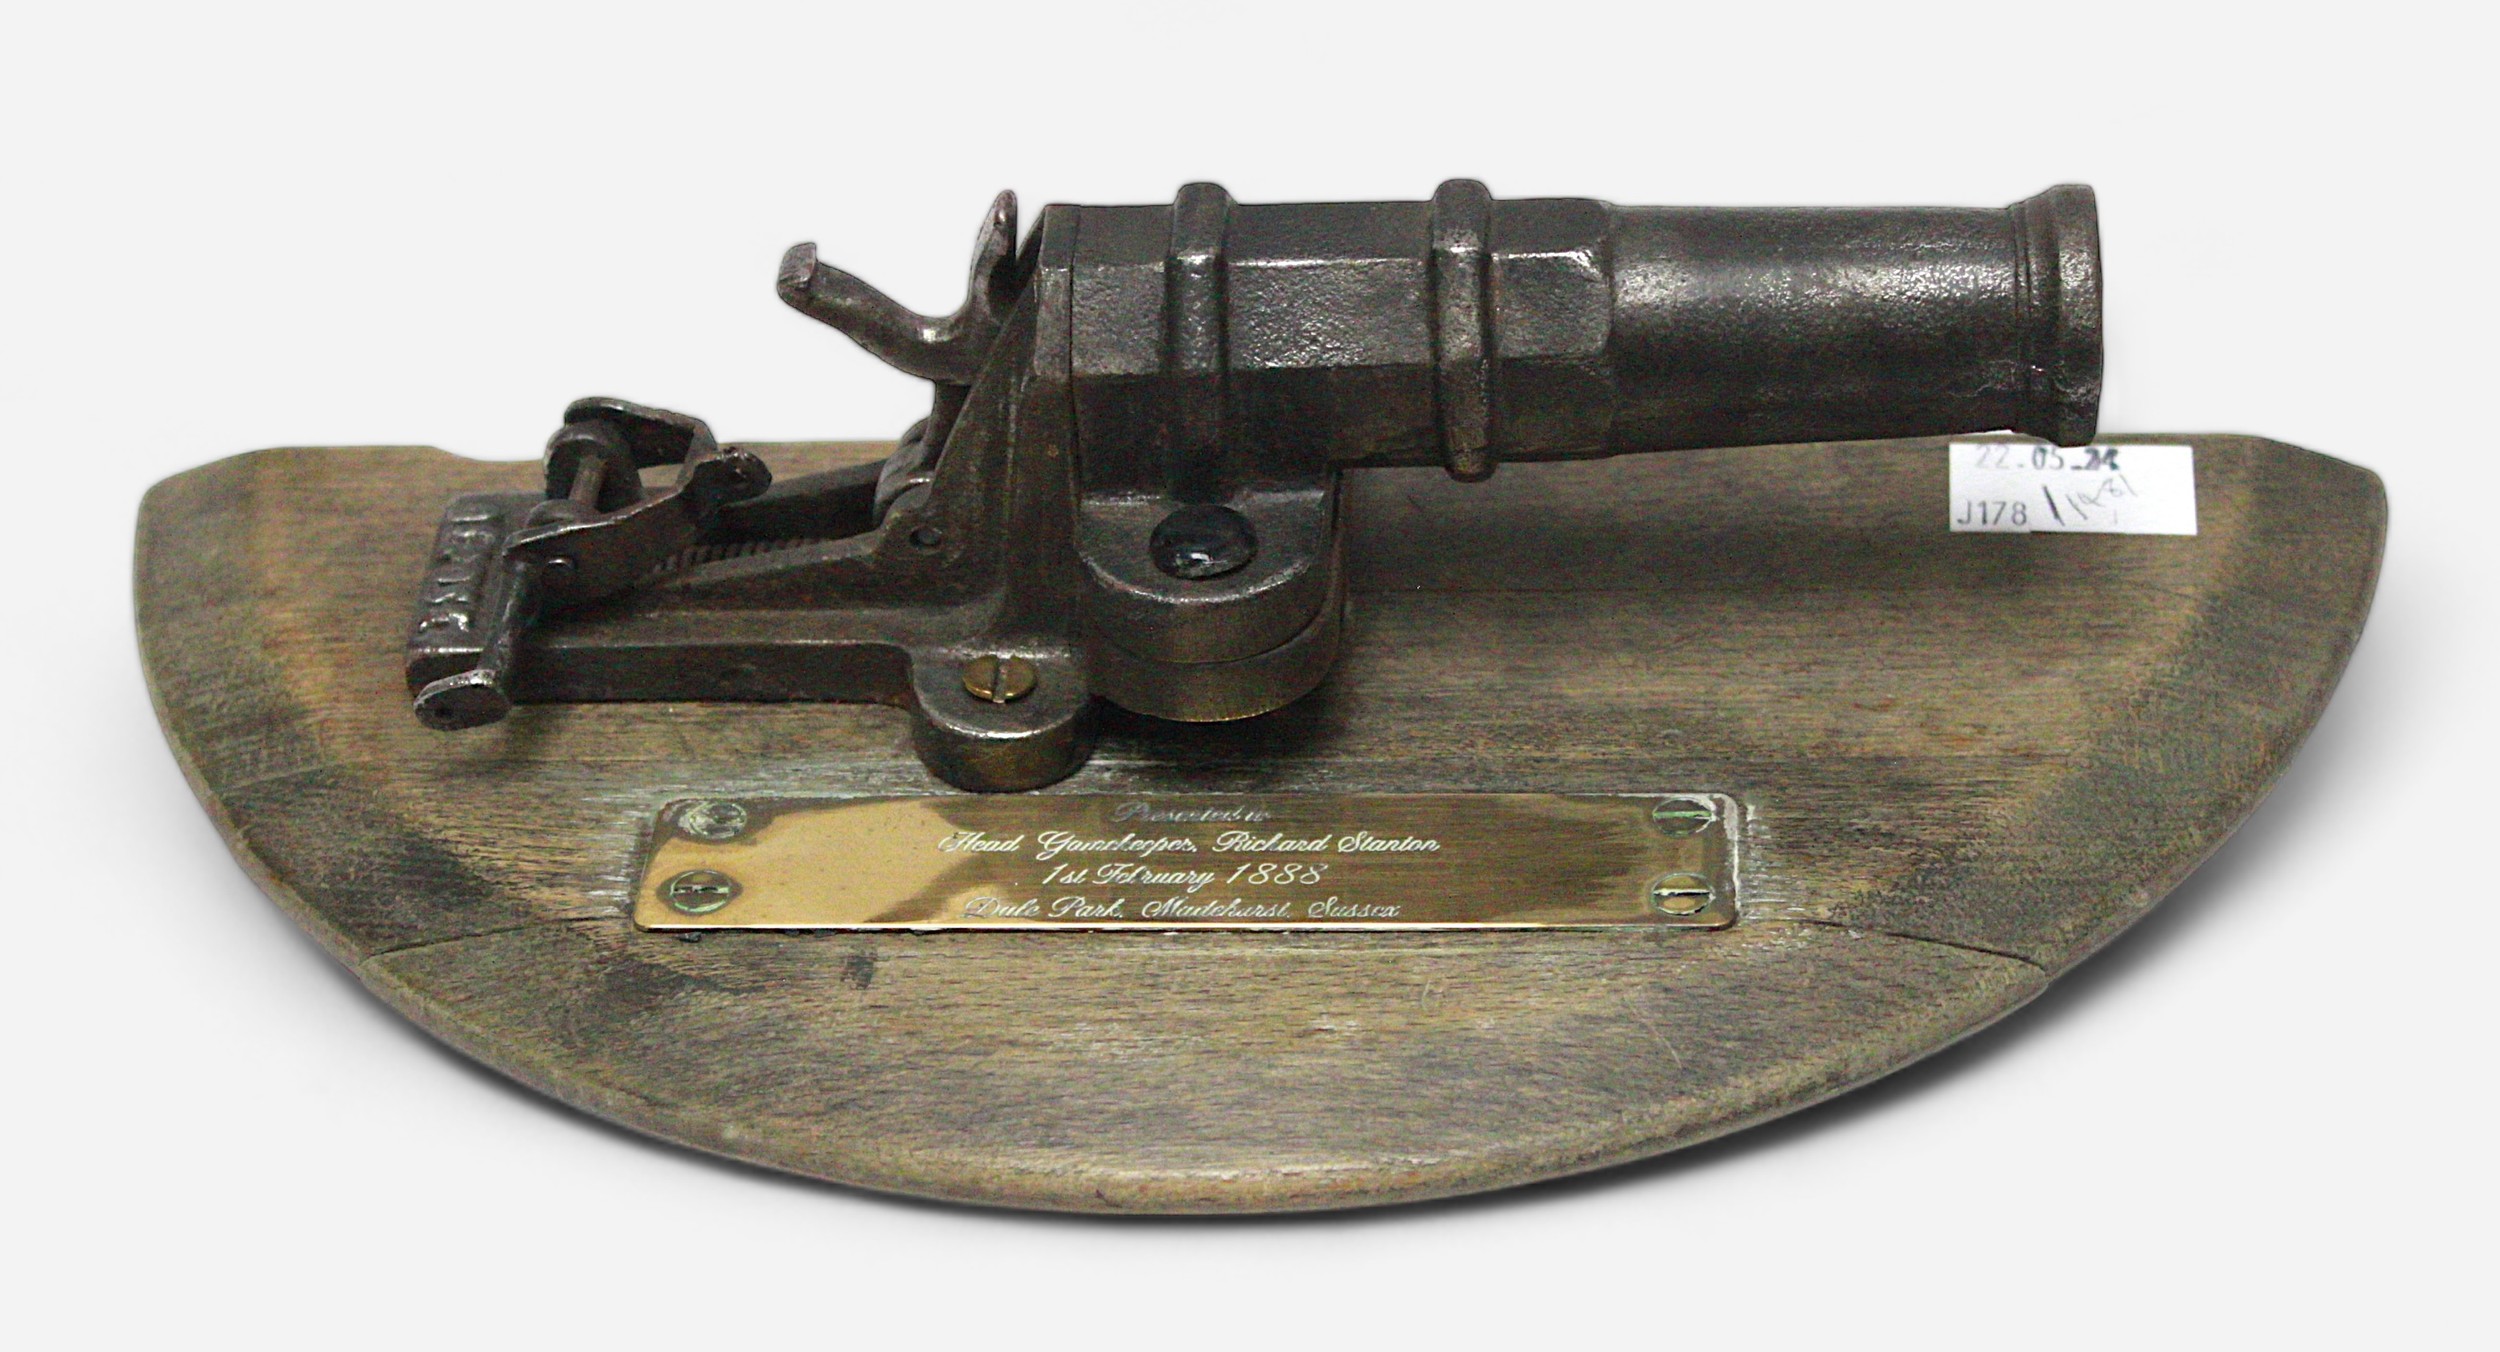 A Victorian gamekeepers poachers Alarm, miniature iron cannon, presented as a memento of service, - Image 2 of 3